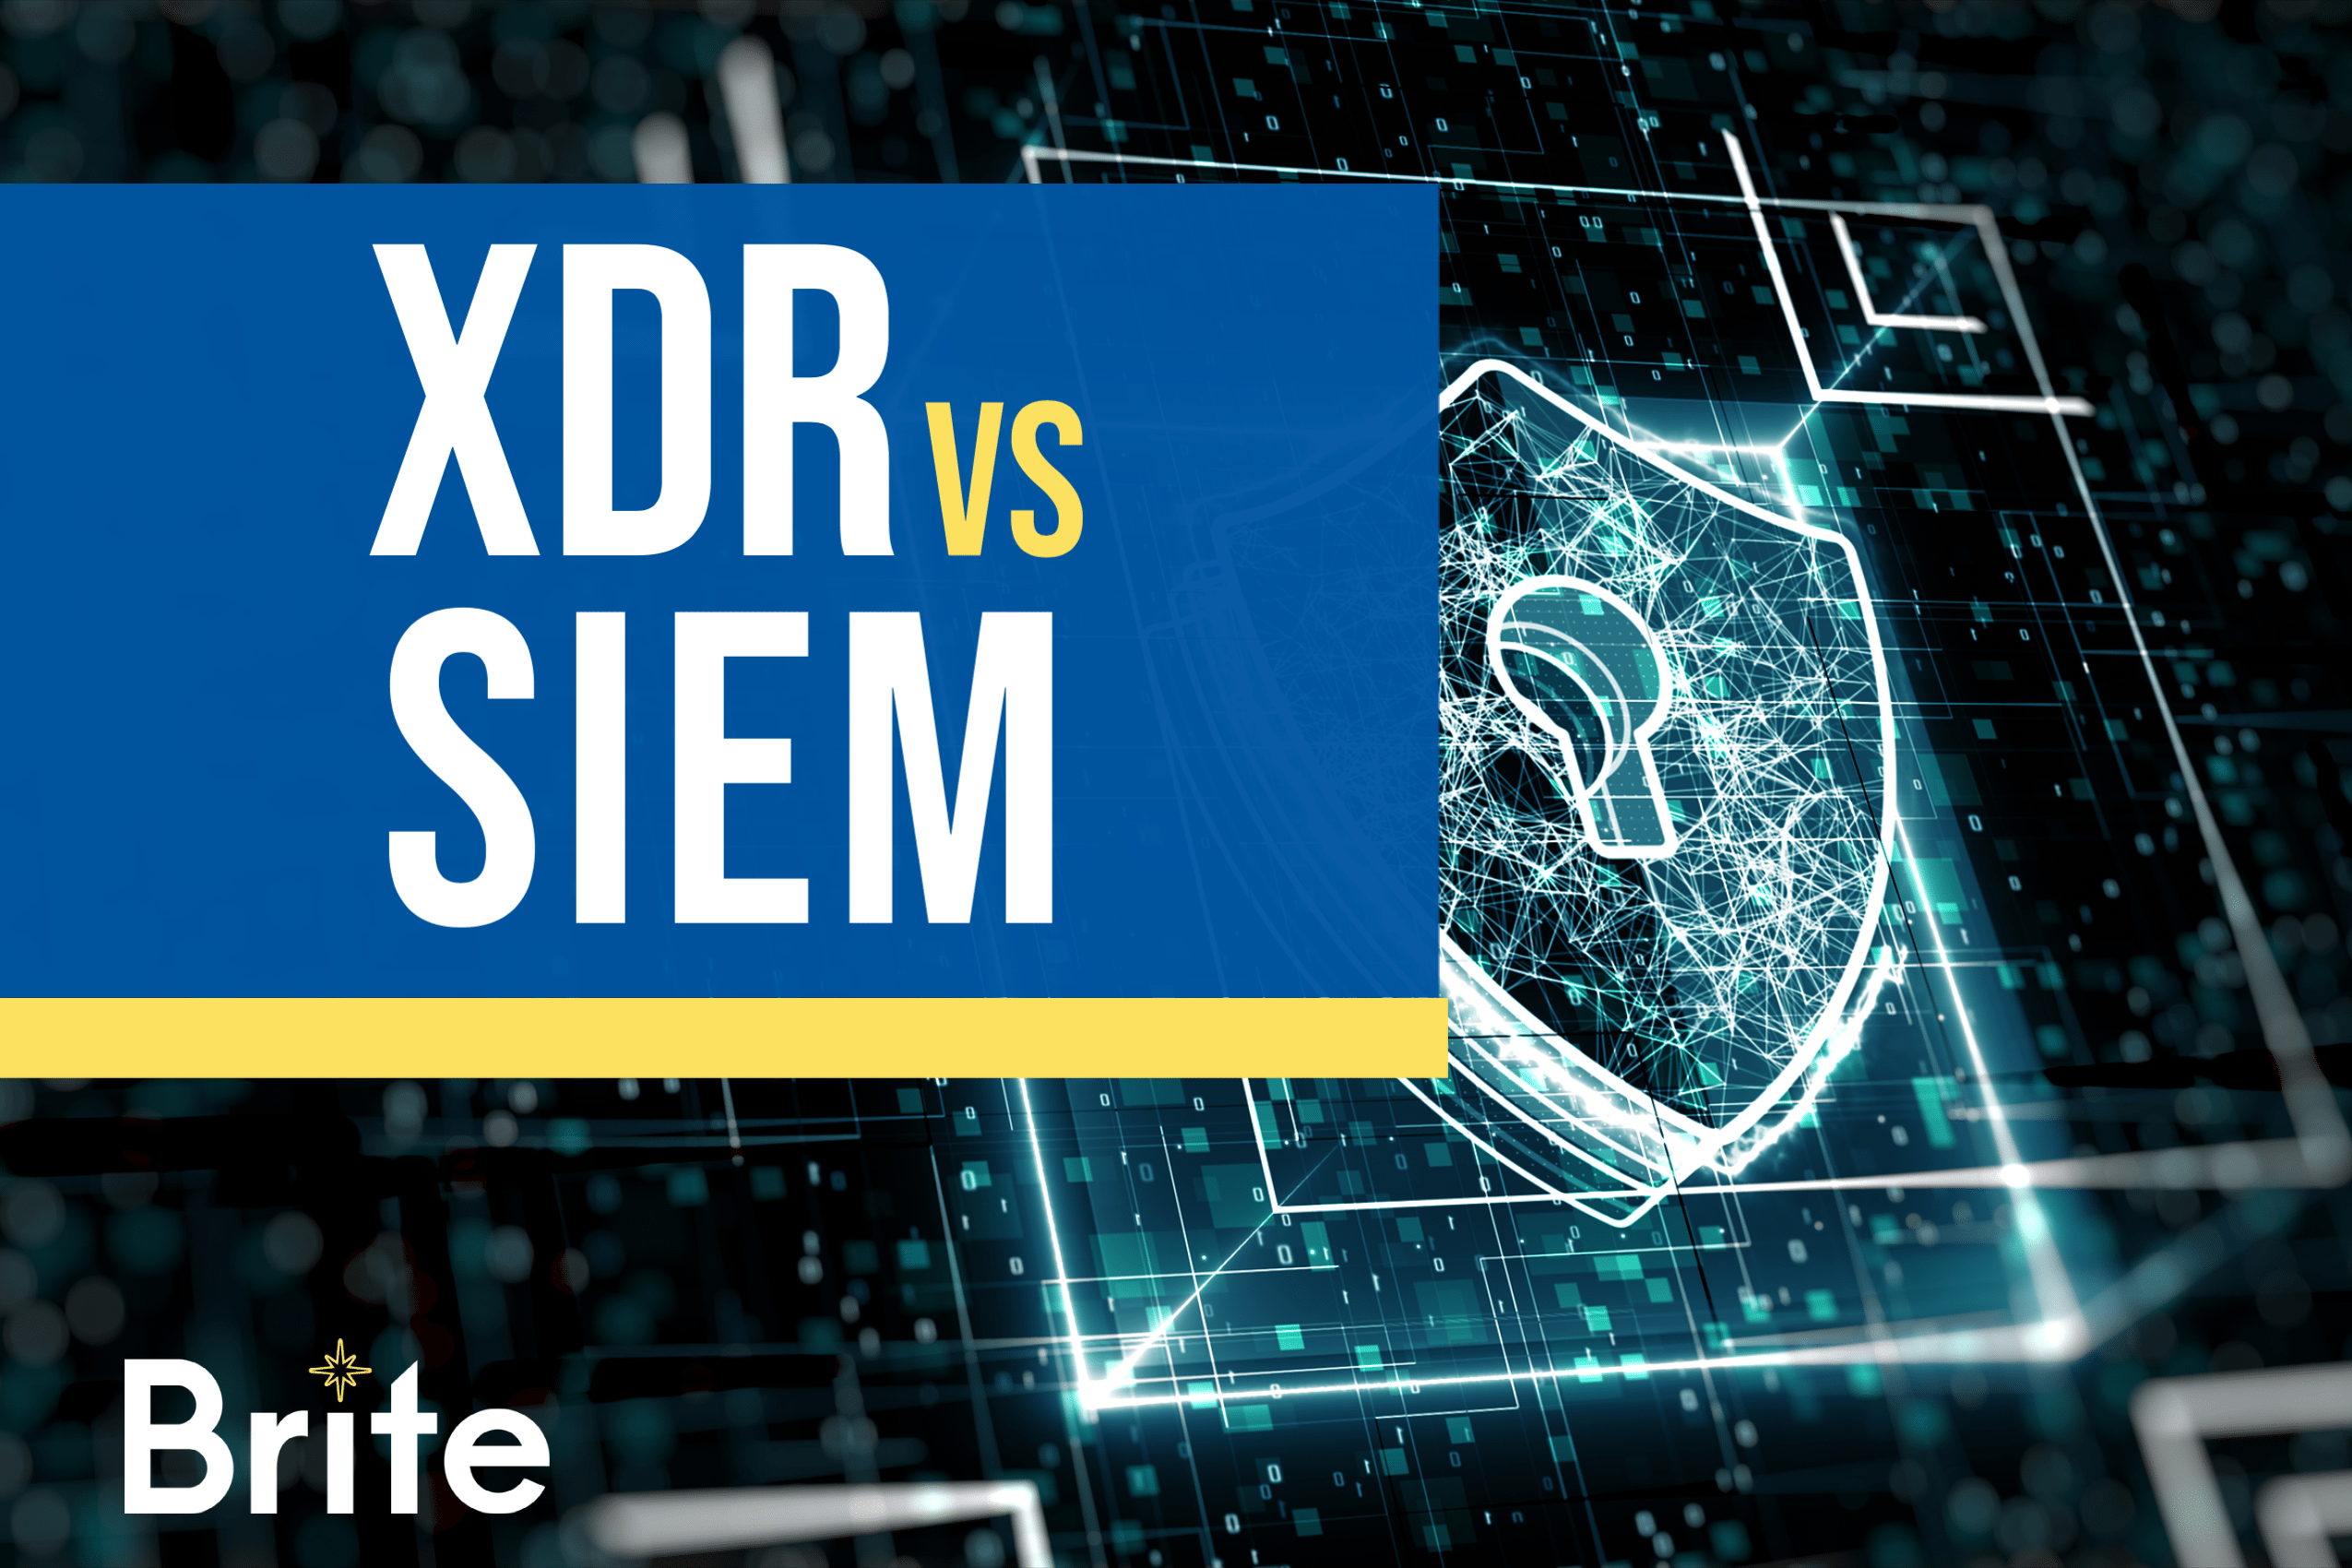 Graphic for "XDR vs SIEM" blog